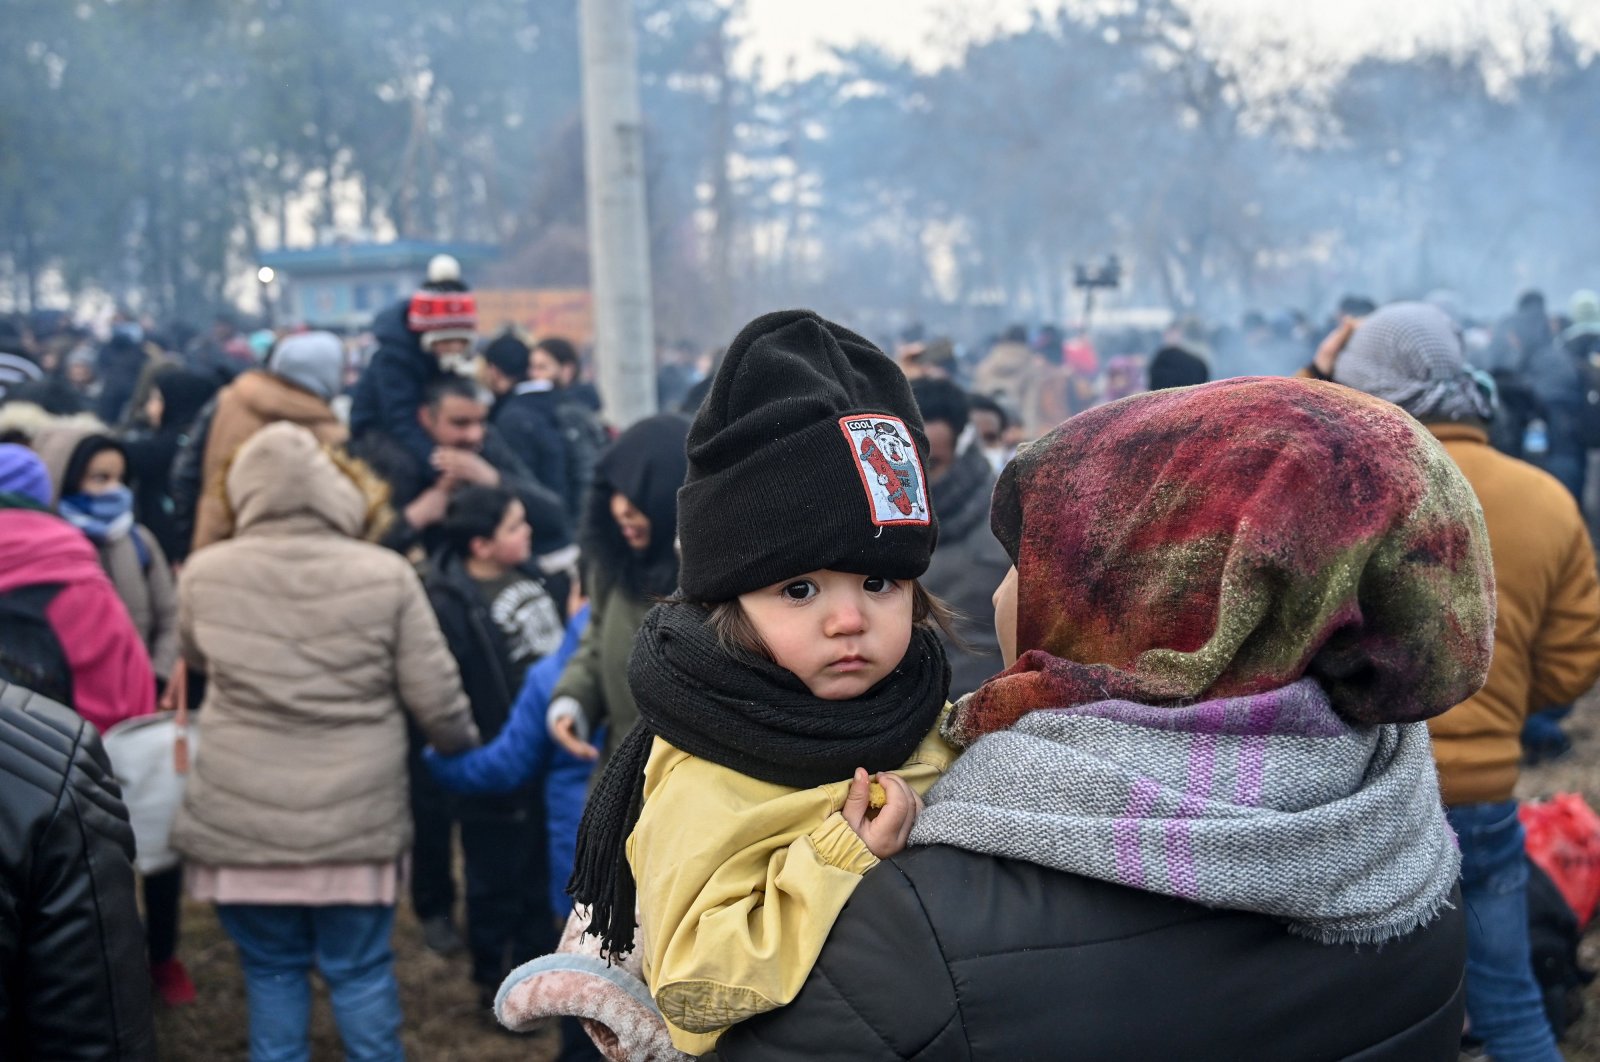 A child looks on as migrants wait to pass the buffer zone at the Turkey-Greece border, at Pazarkule, in Edirne district, Feb. 29, 2020. (AFP Photo)